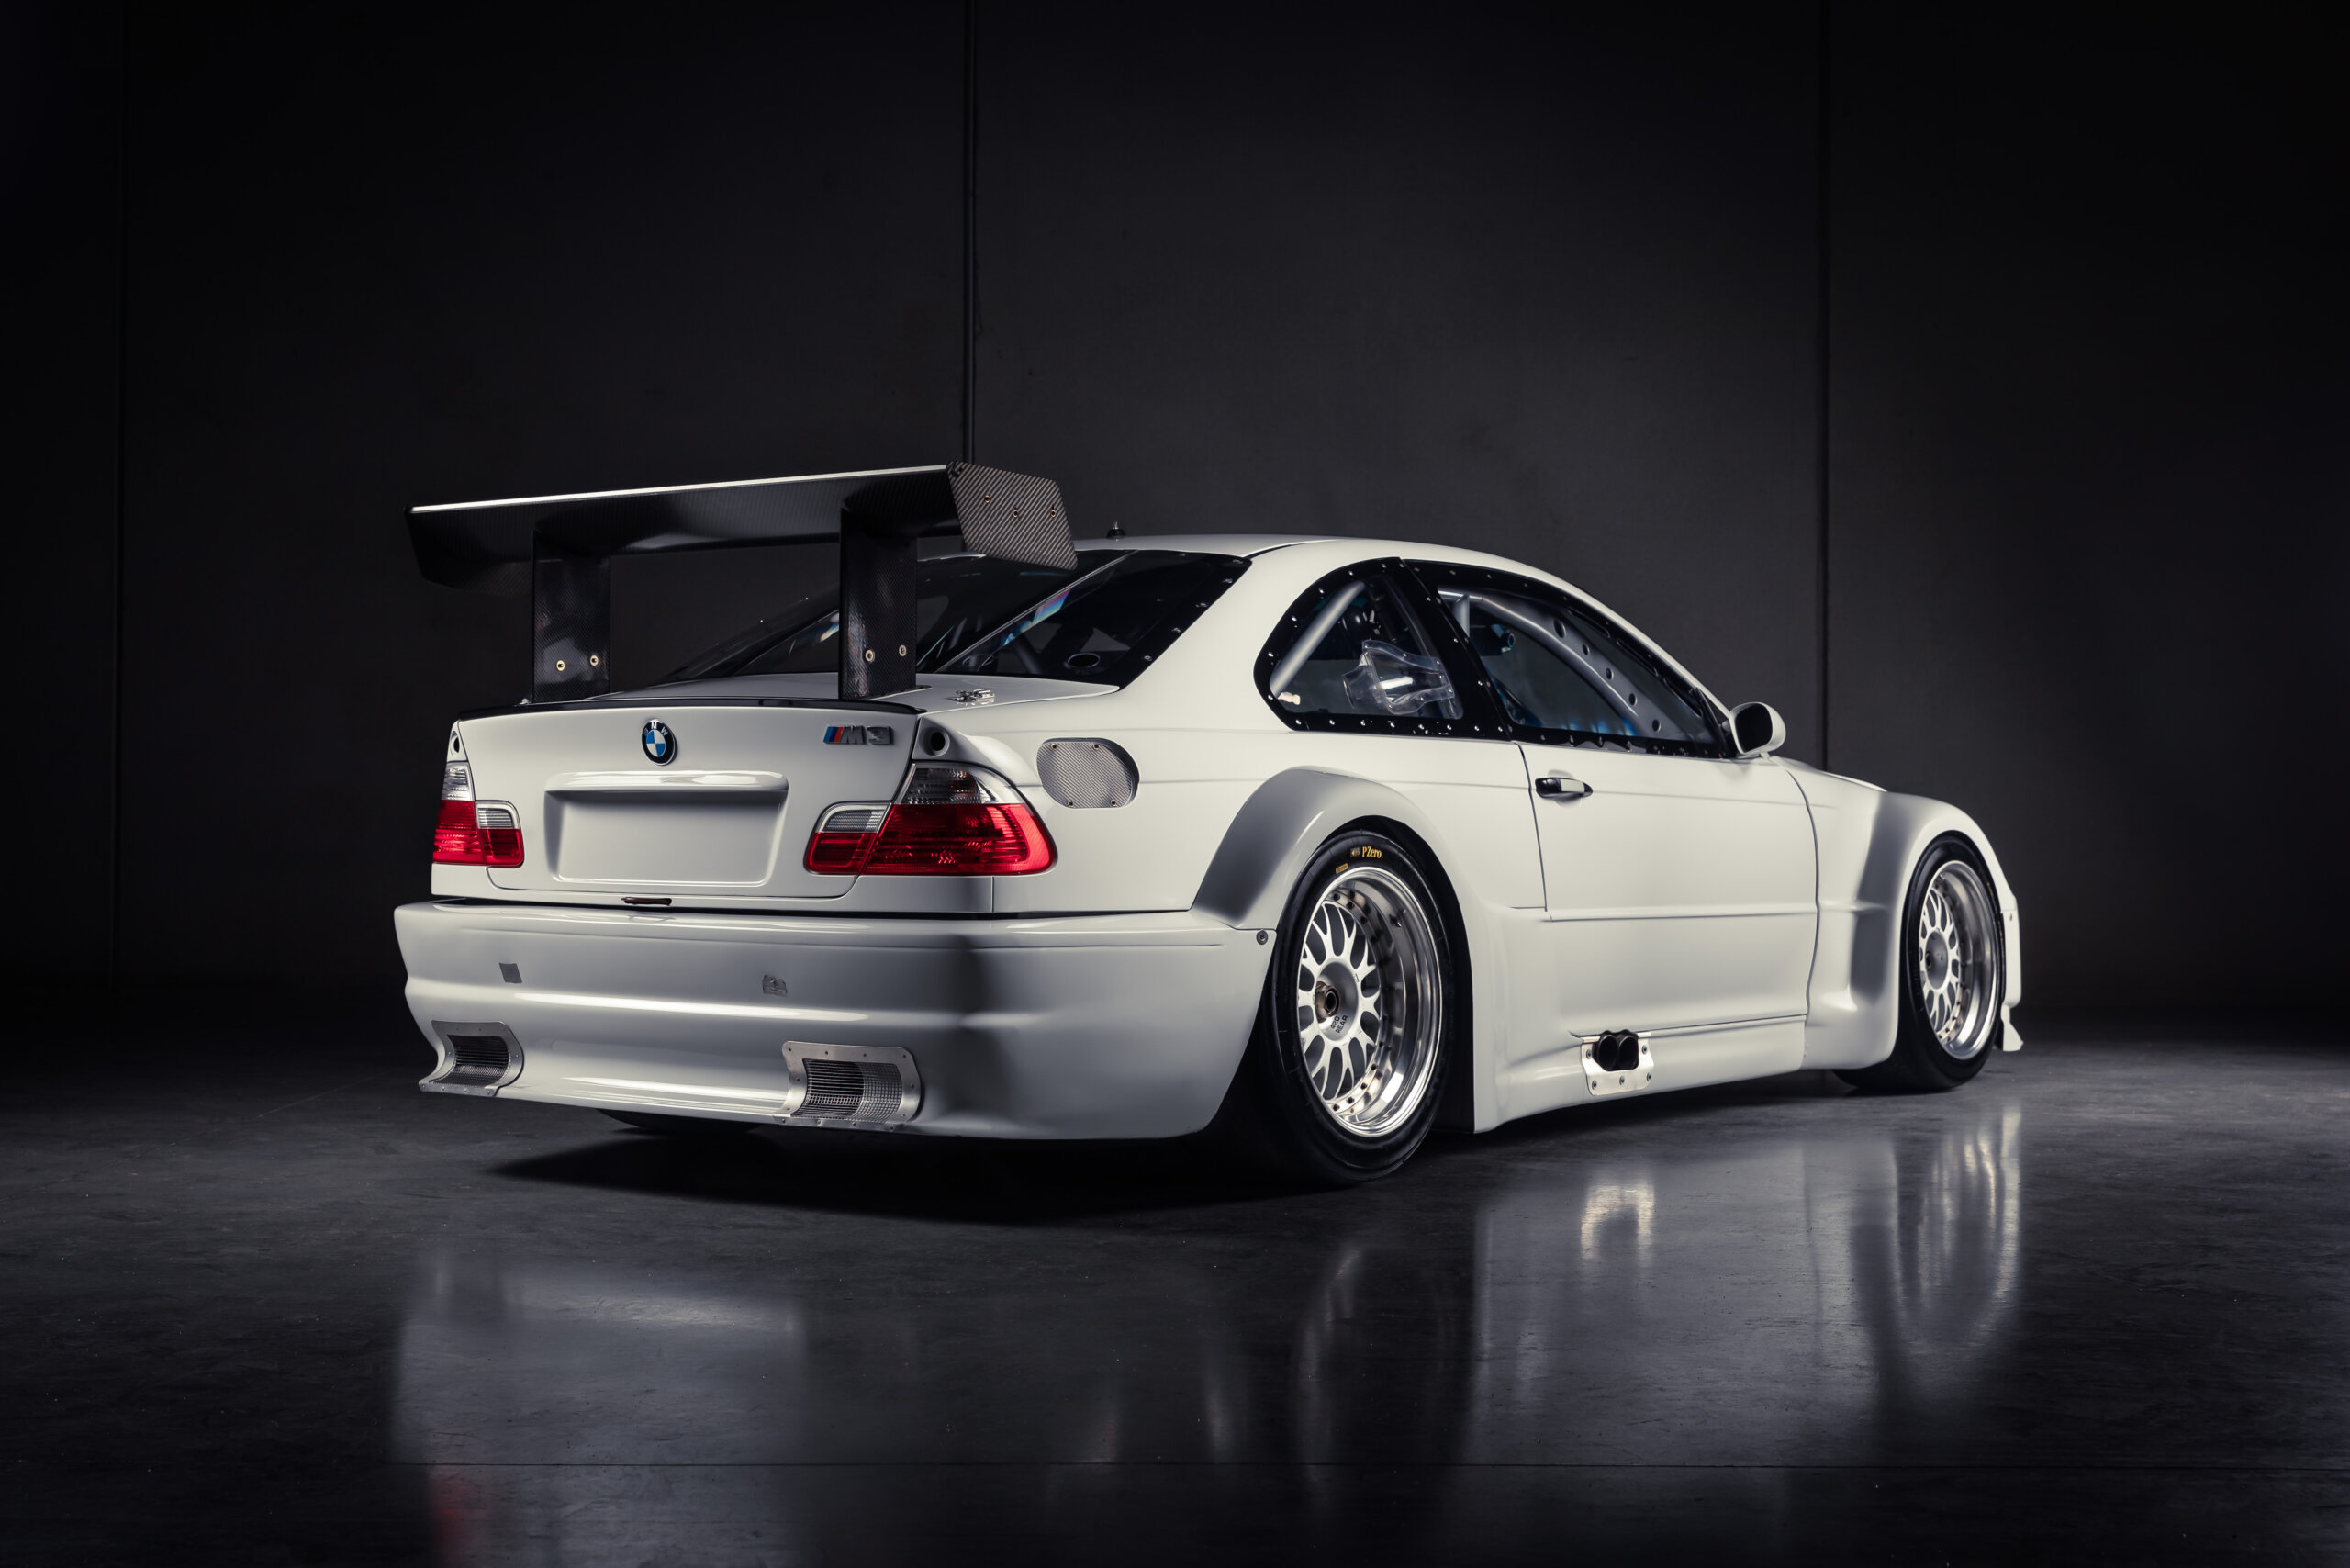 This 2001 Bmw E46 M3 Gtr Race Car Is A Real Unicorn | Carscoops